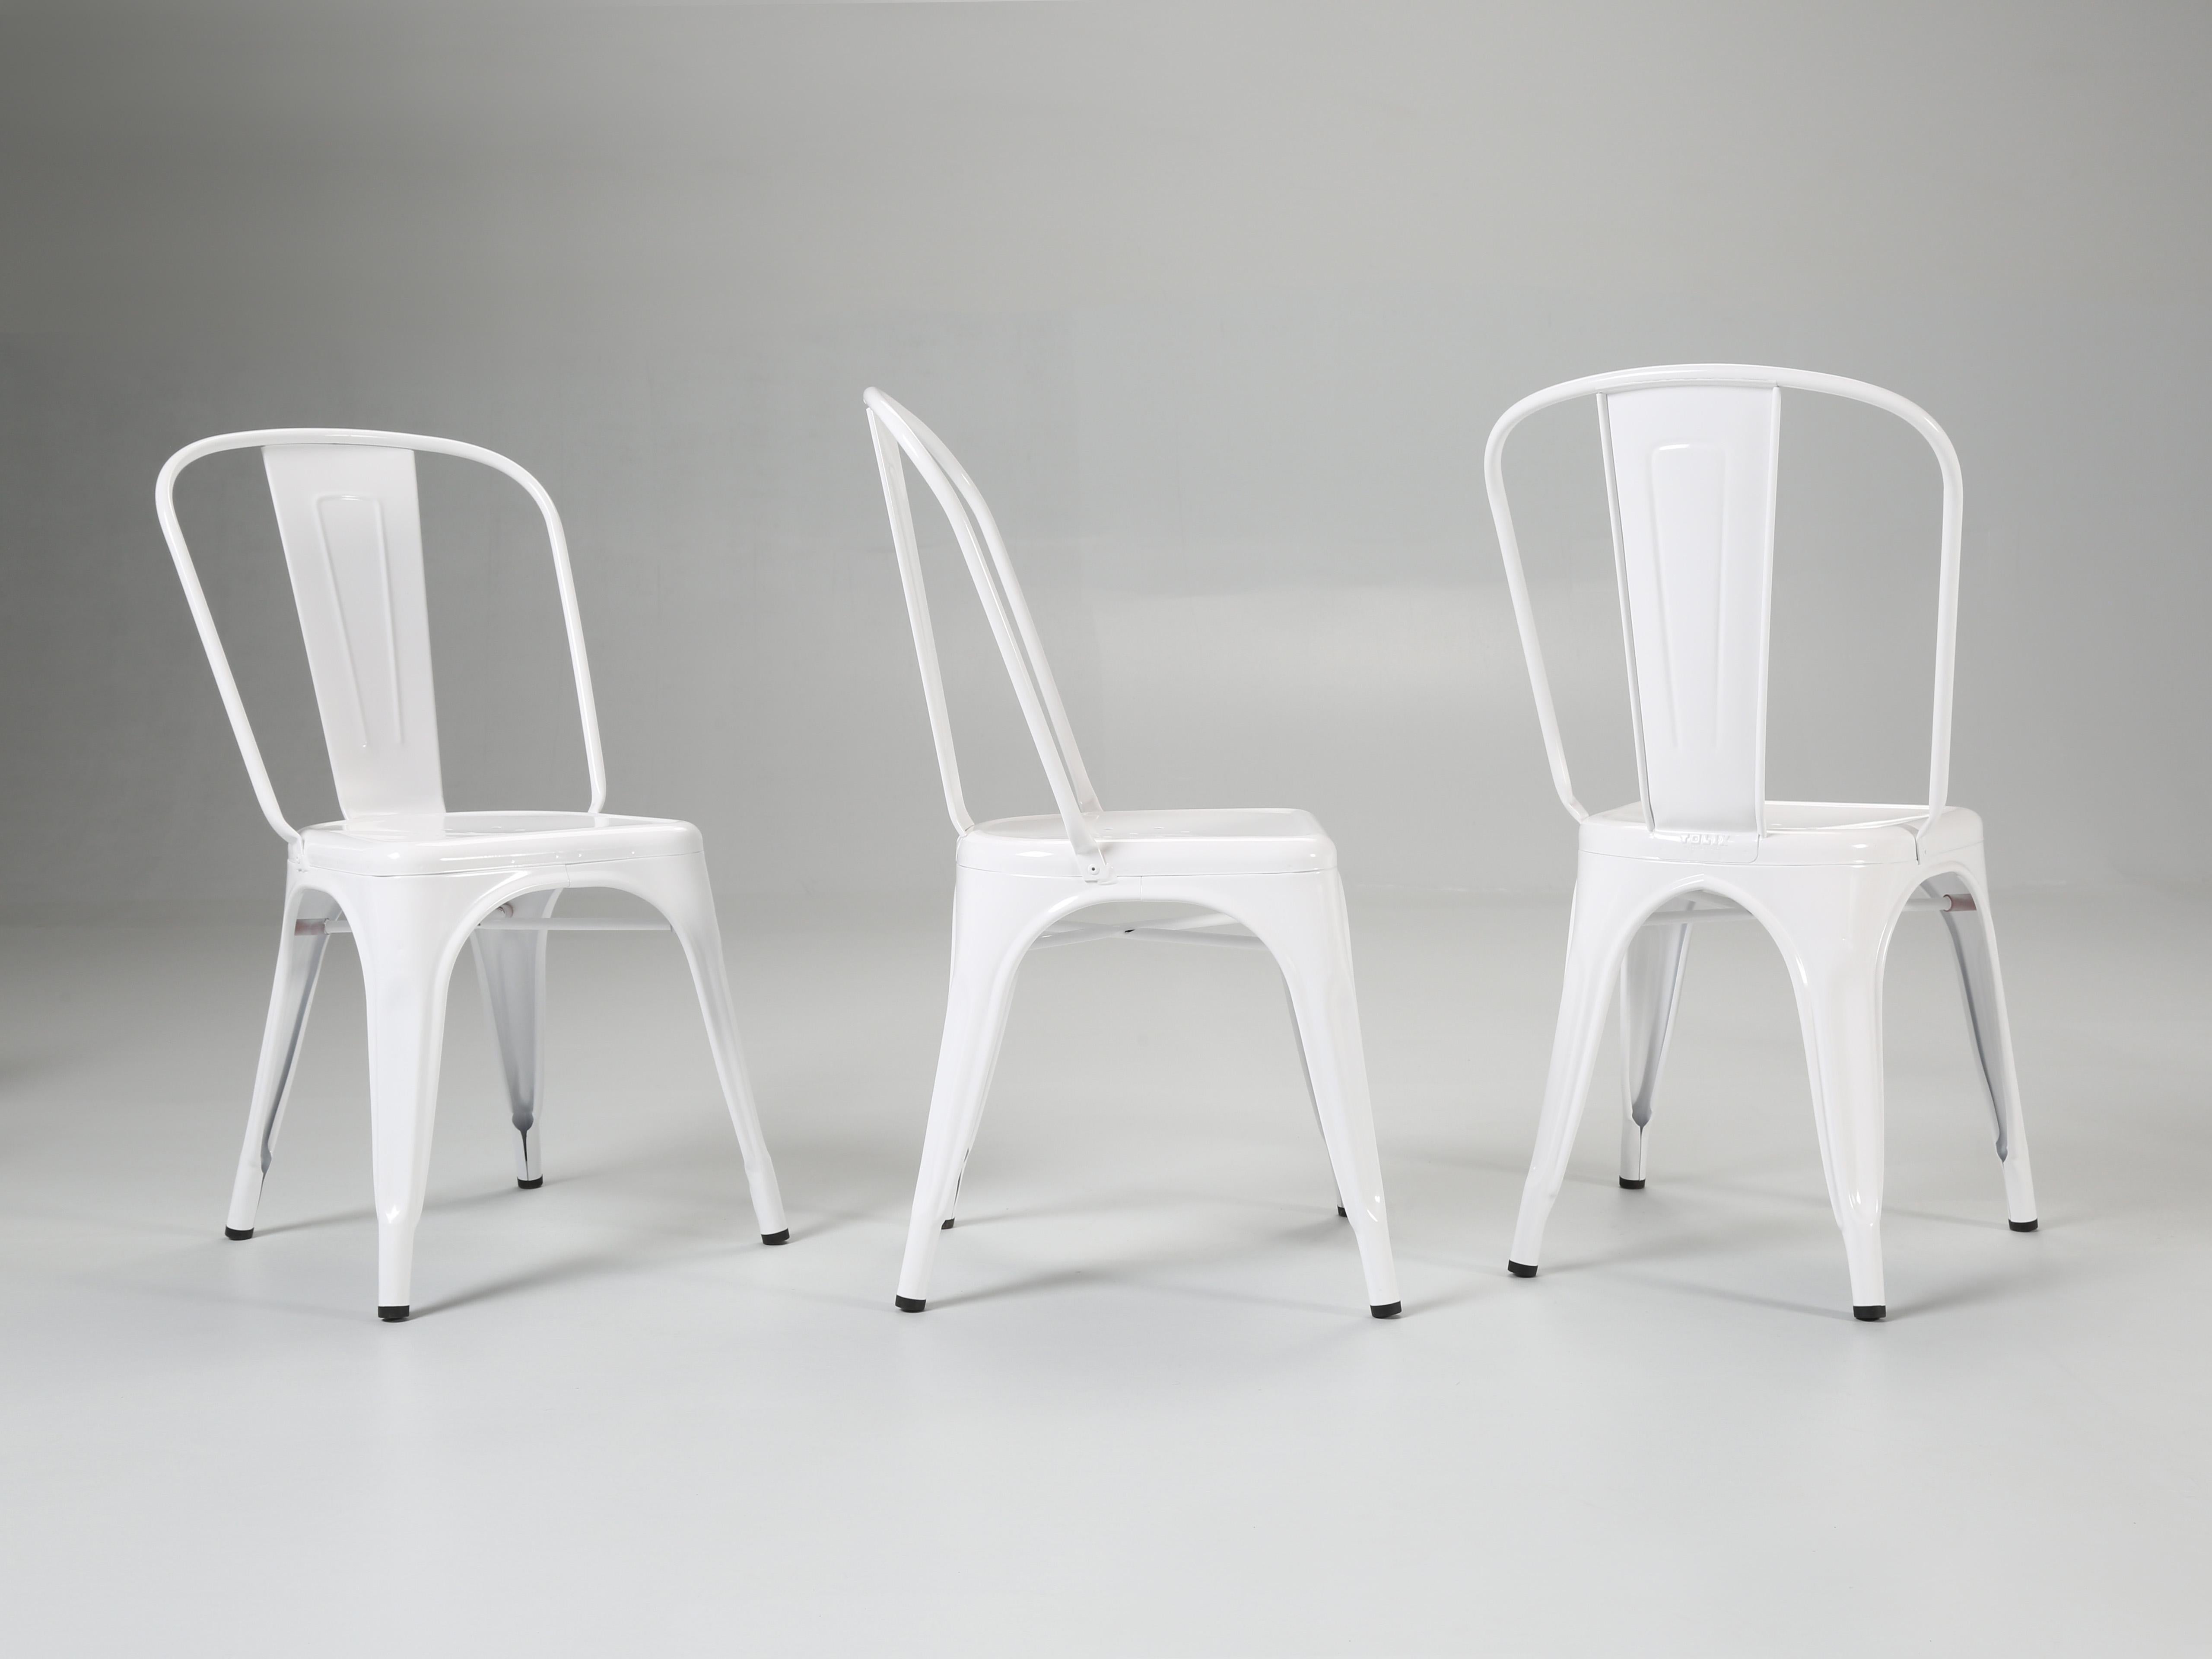 Hand-Crafted Genuine French Made Tolix Steel Chairs Stackable '12' High, Hundred's Available